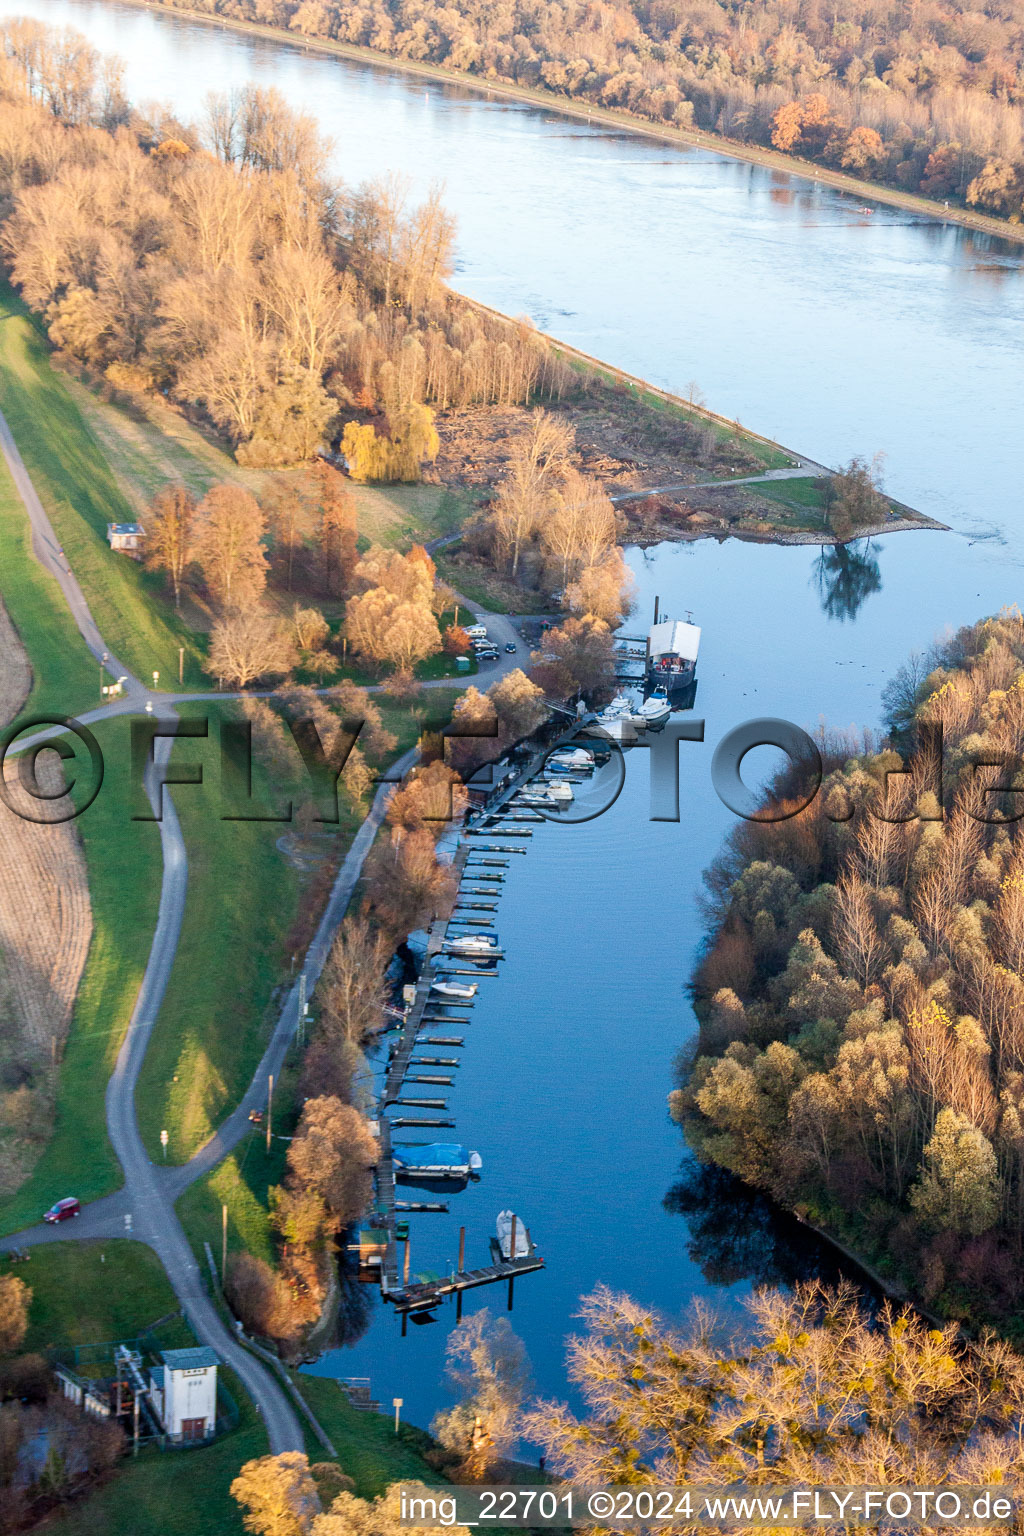 River estuary of the Lauter into the Rhine in Neuburg am Rhein in the state Rhineland-Palatinate, Germany